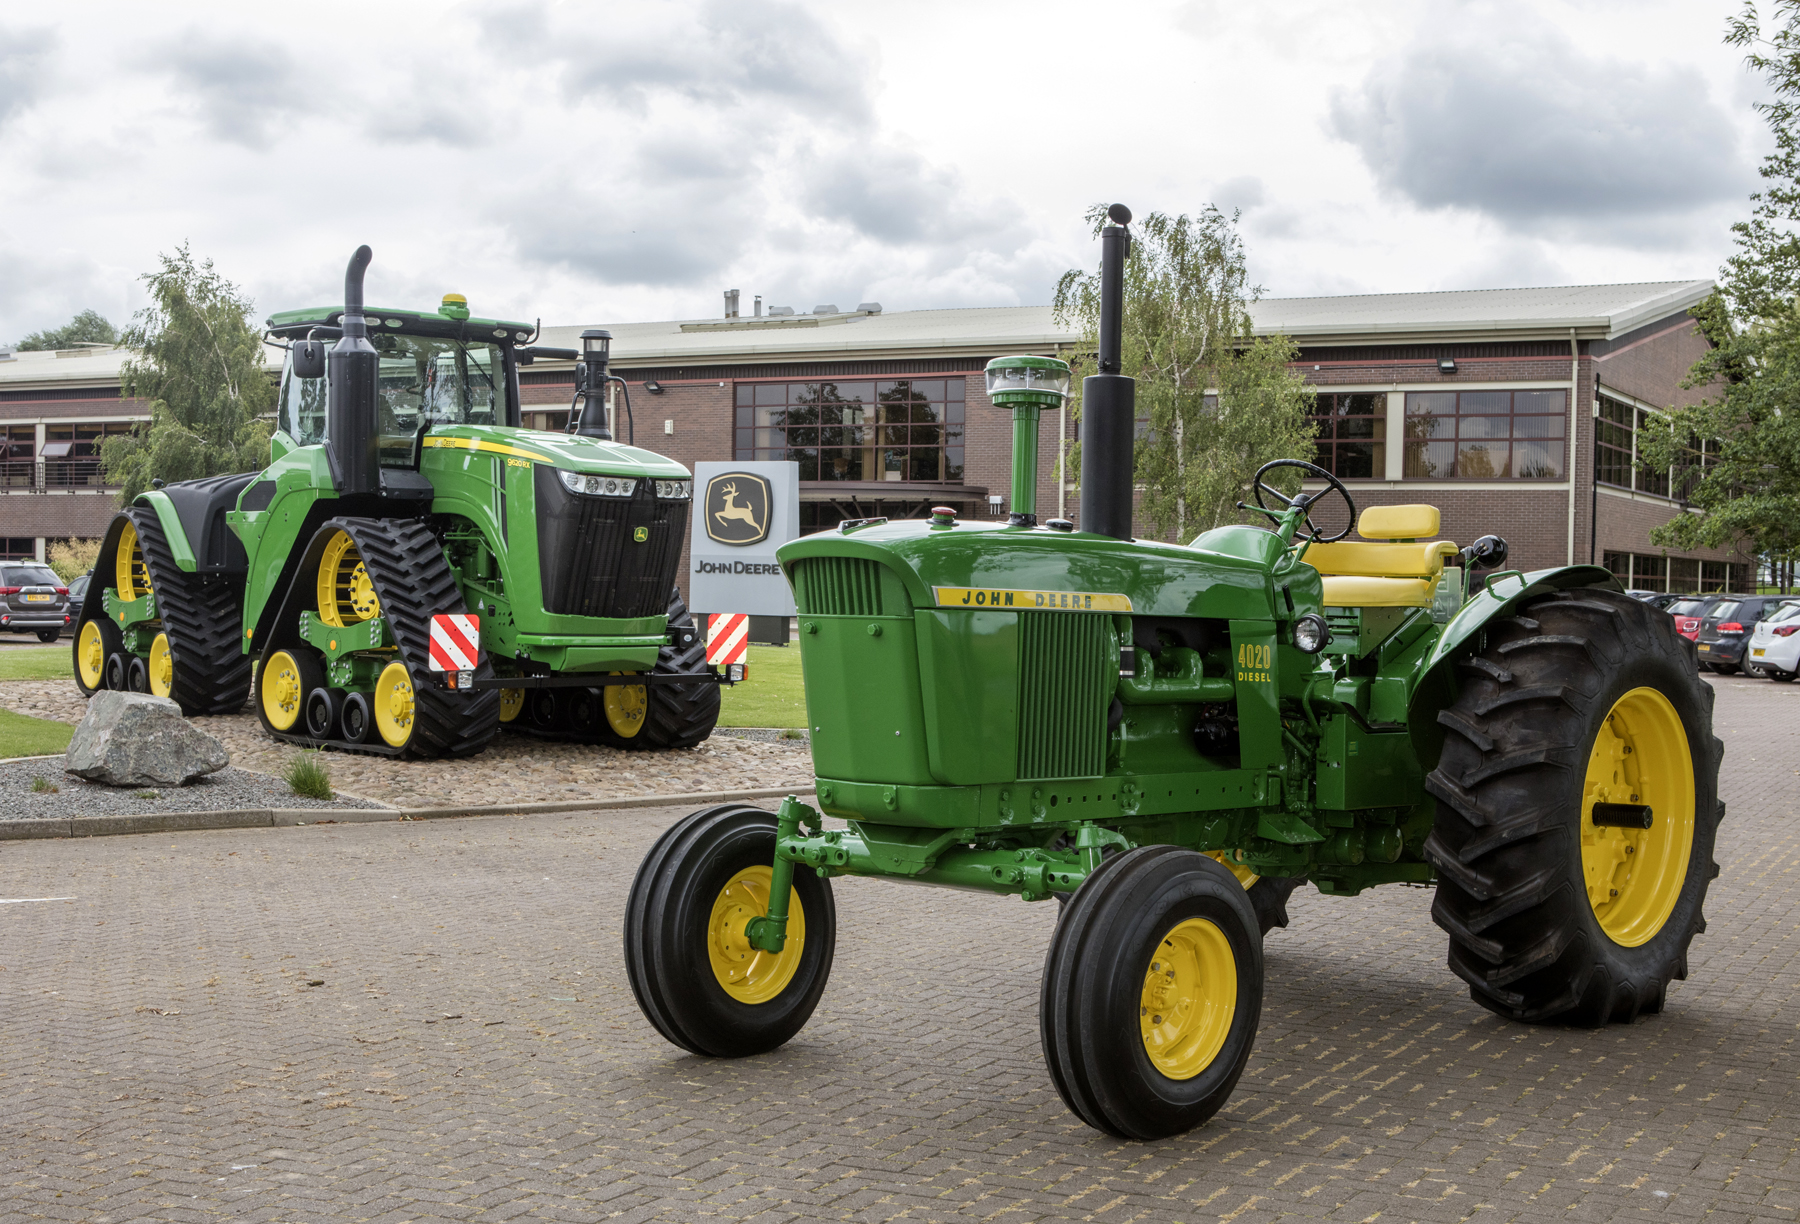 John Deere customers, fans and families are invited to join the anniversary celebrations